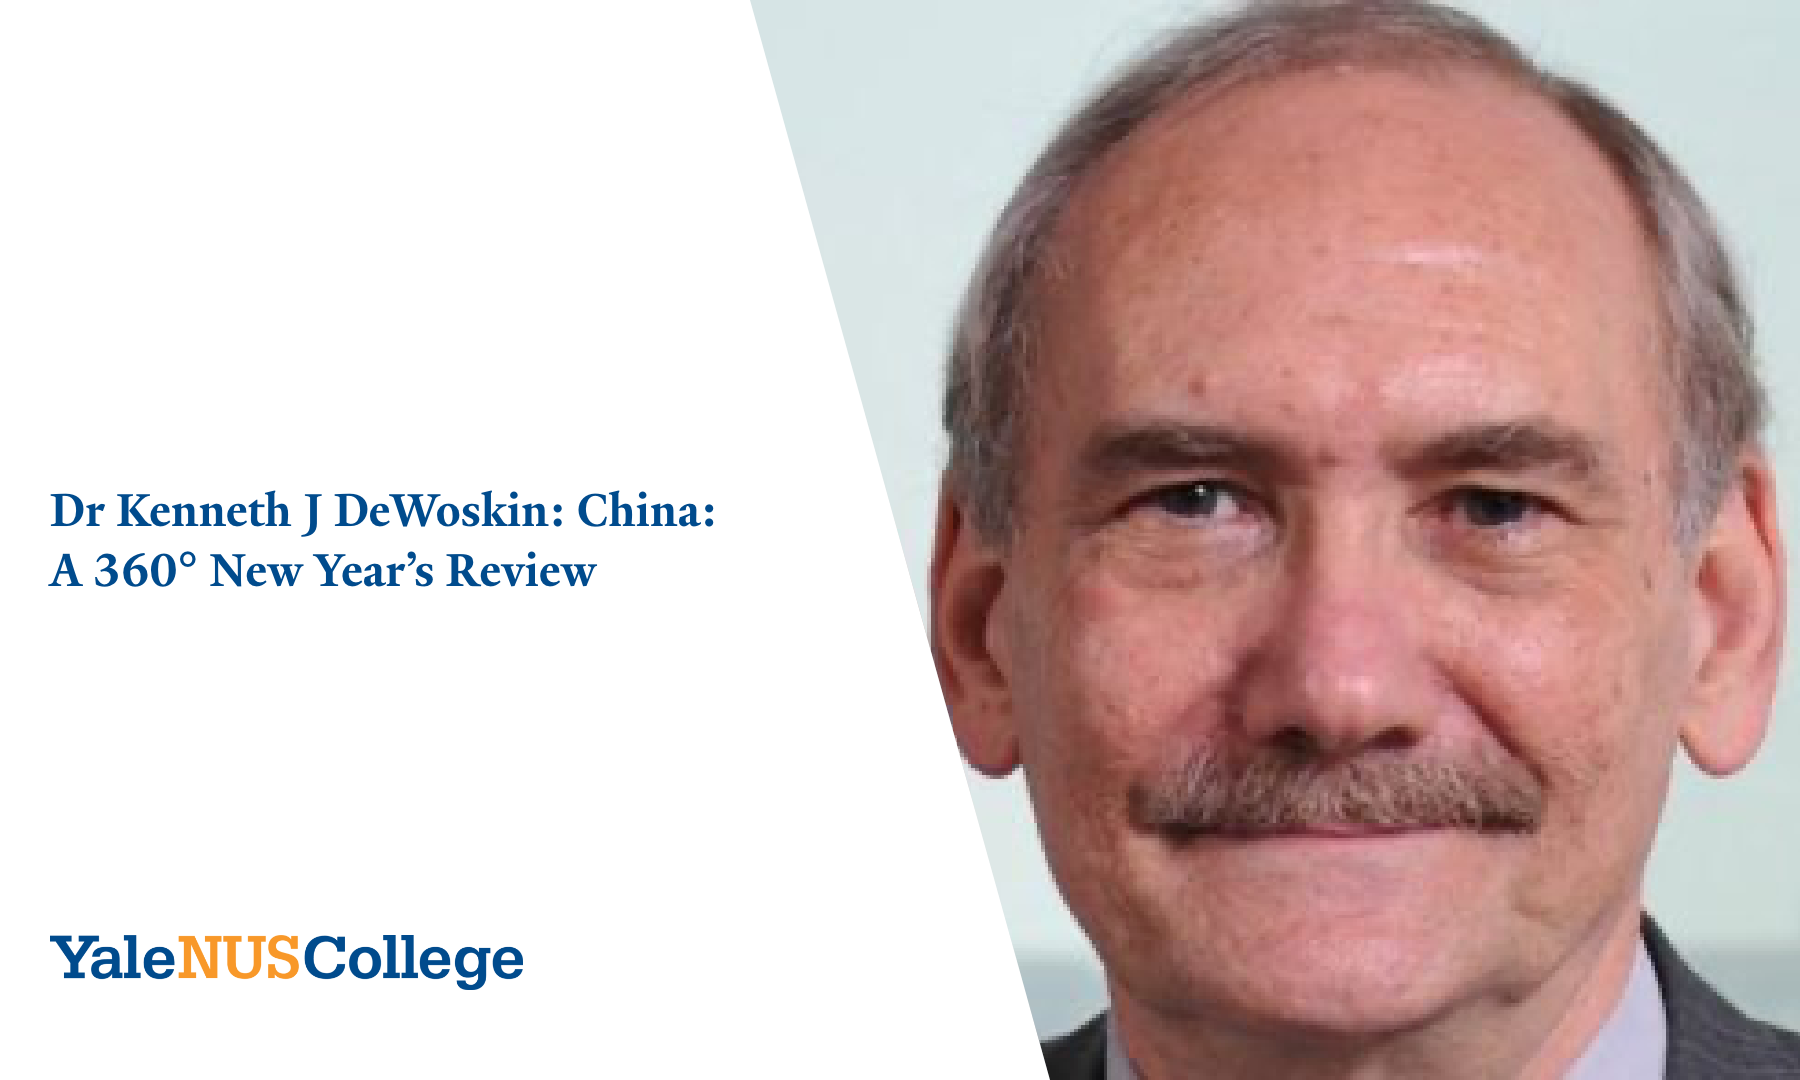 Dr Kenneth J DeWoskin: China: A 360° New Year's Review